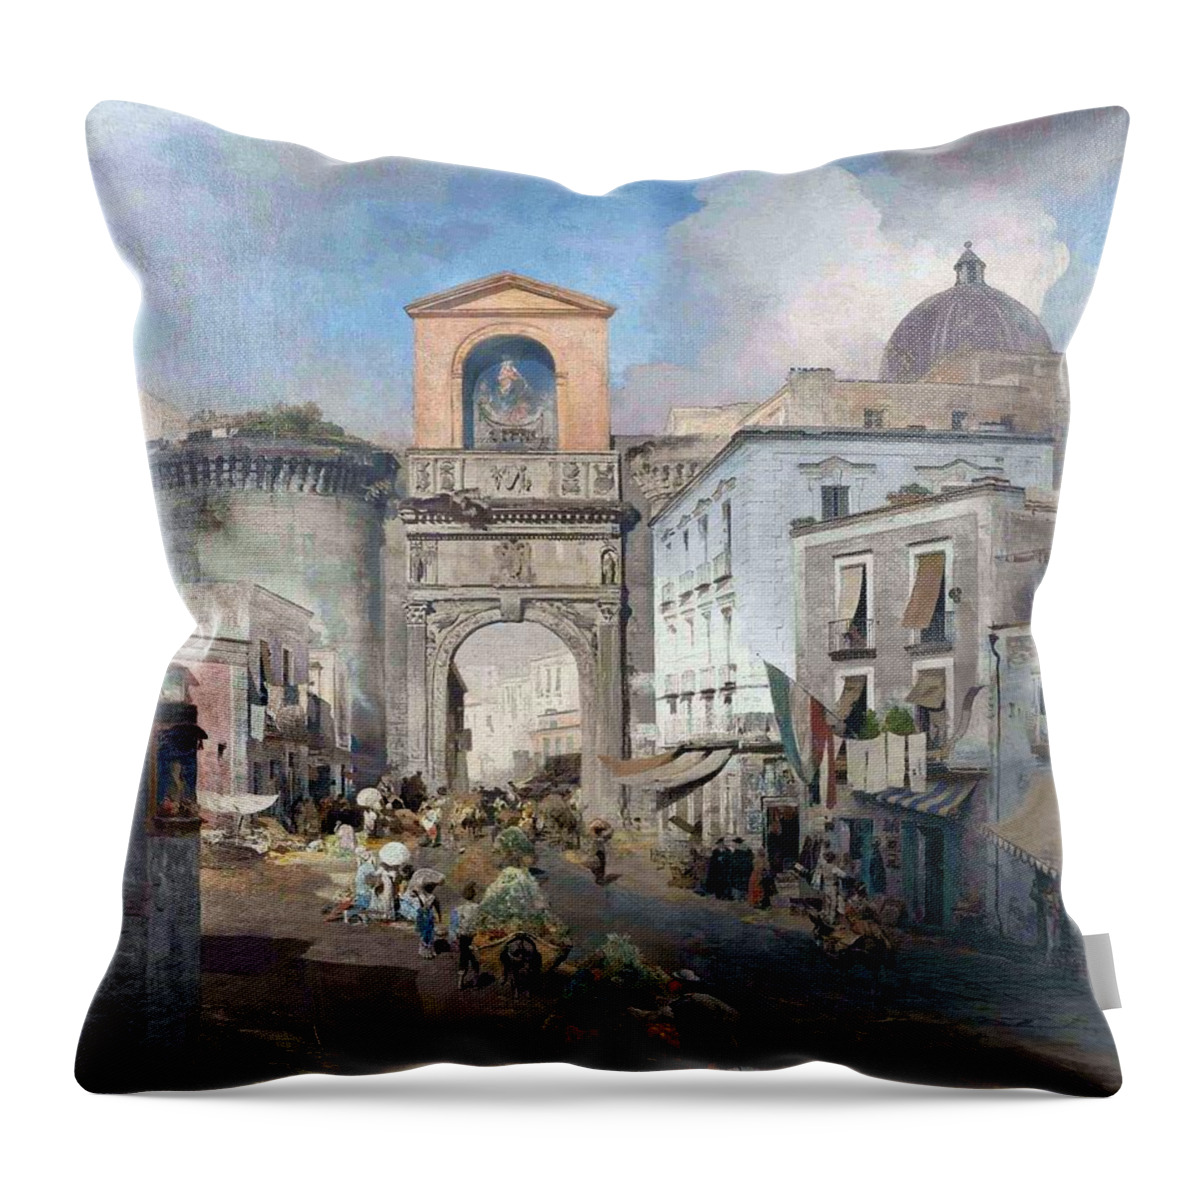 Going To Market Throw Pillow featuring the painting Going To Market by MotionAge Designs